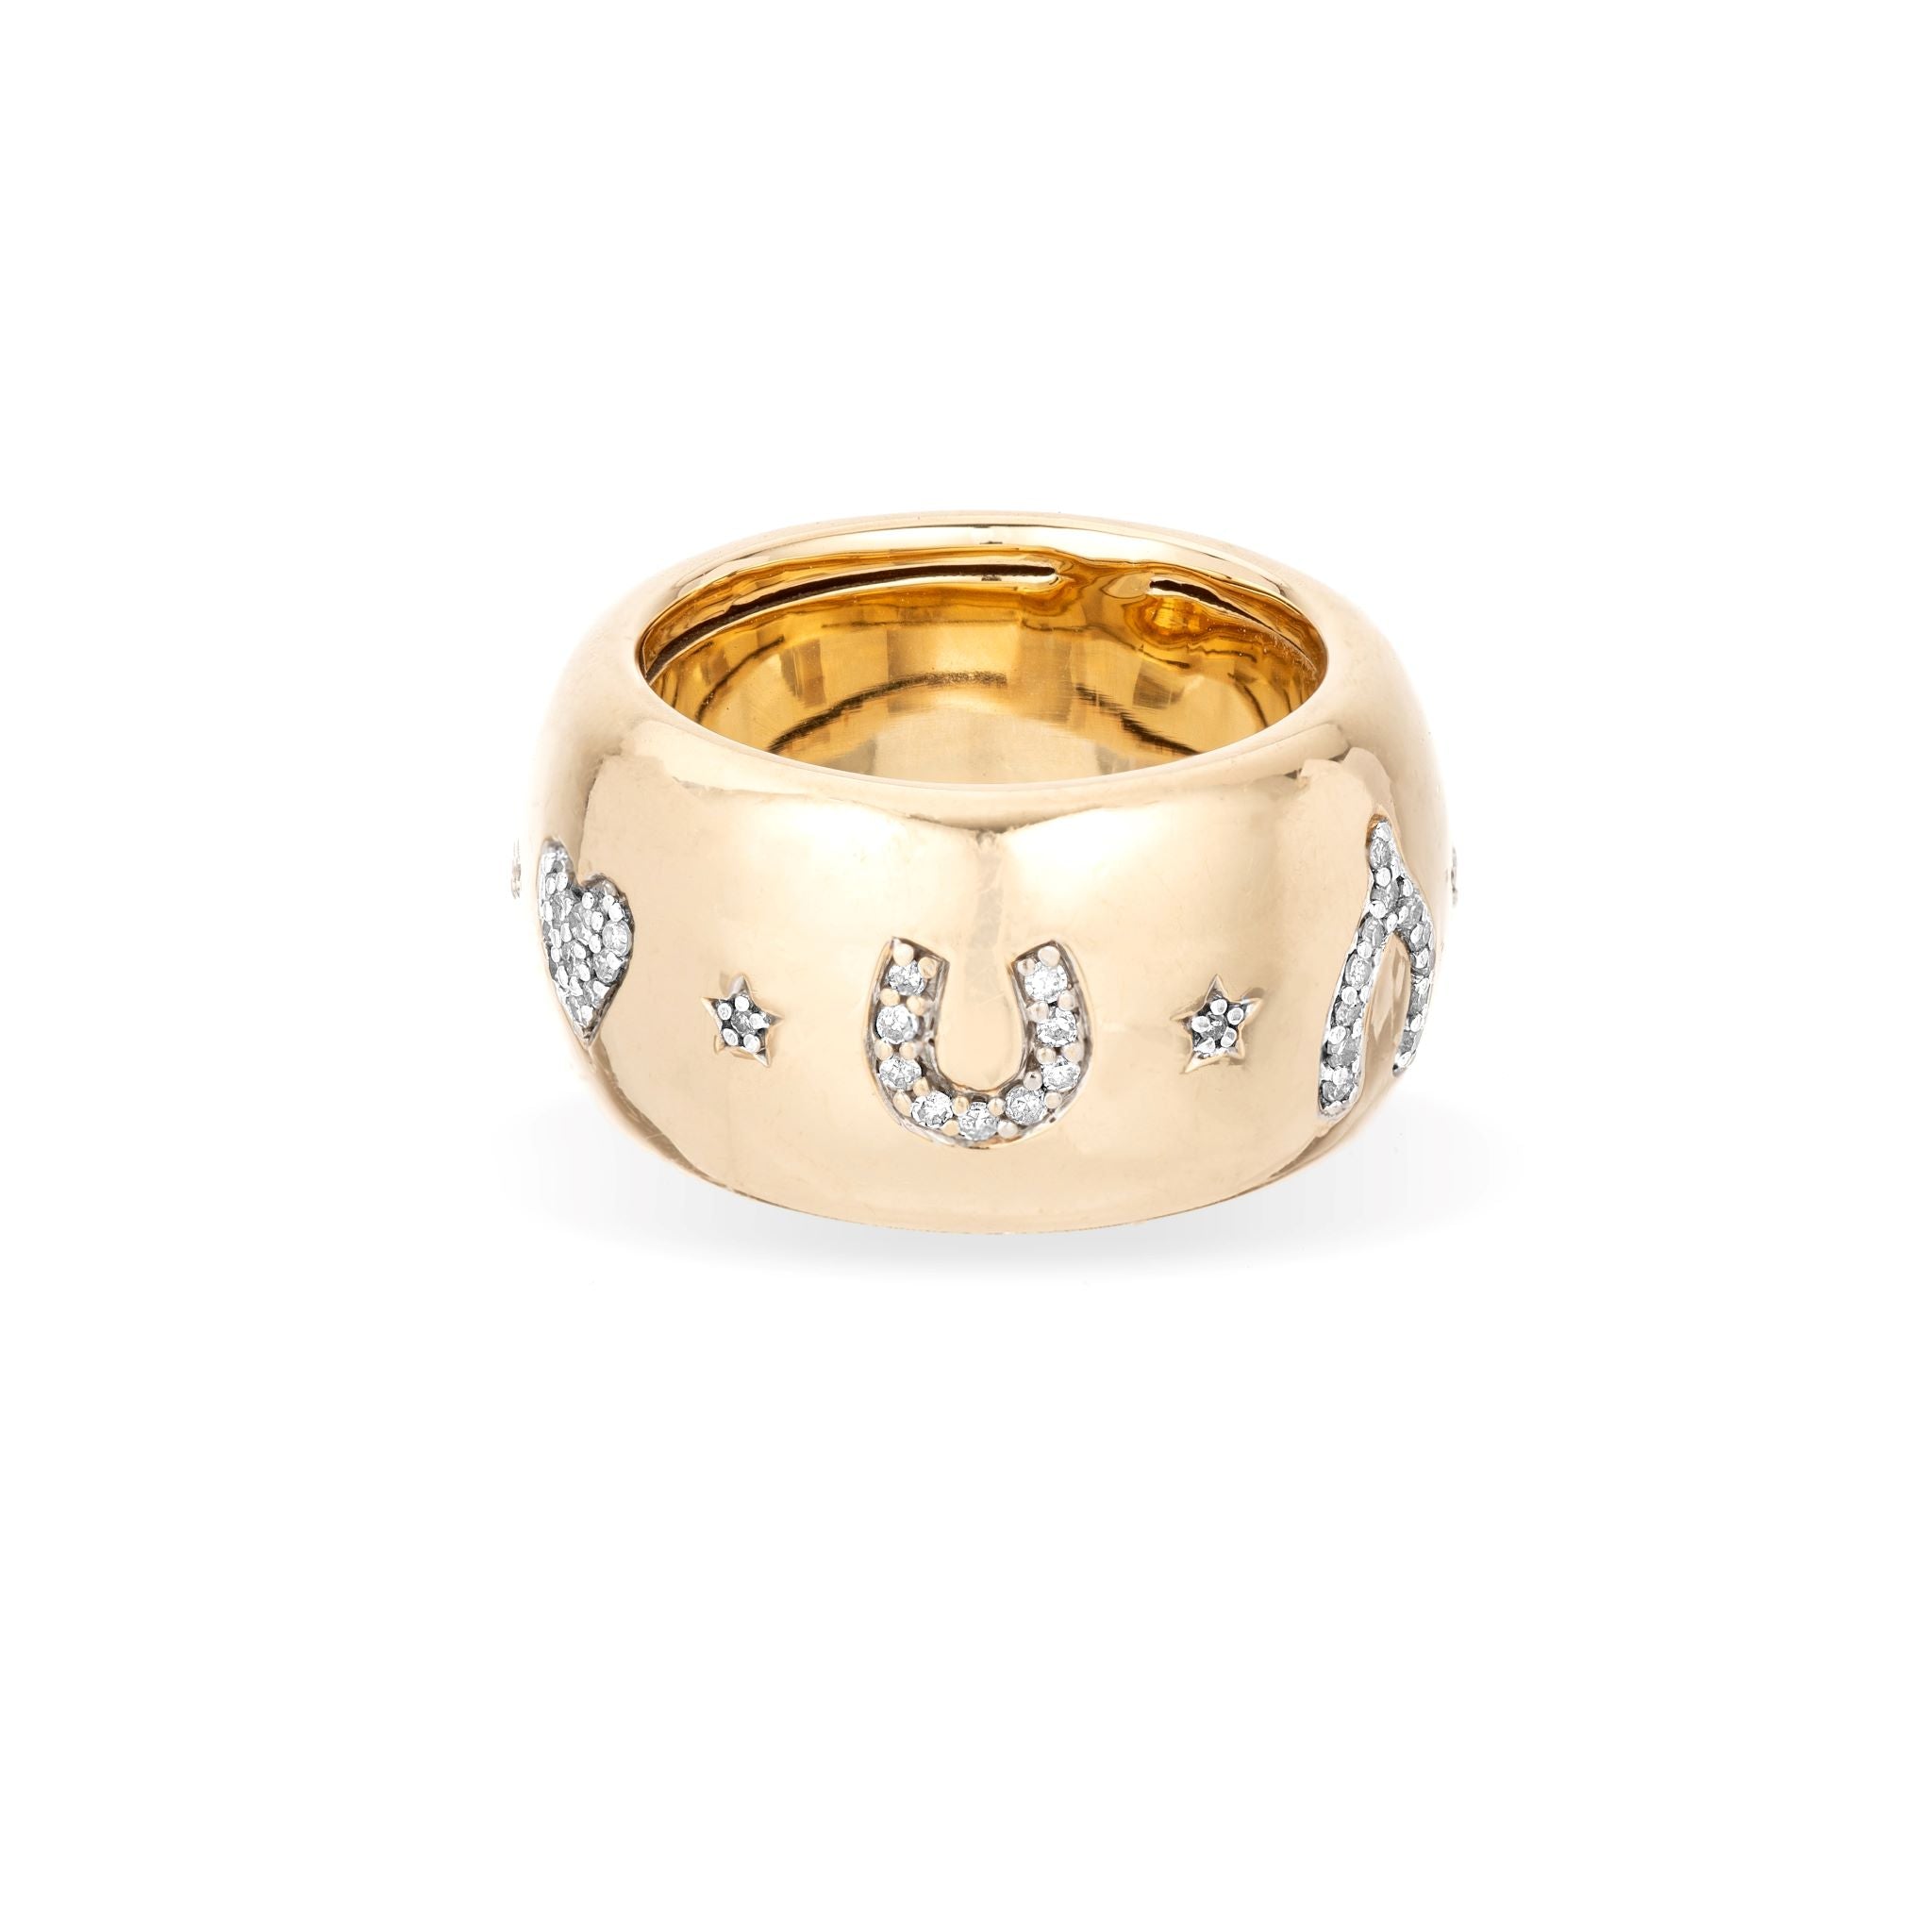 Gold Plated Elephant Ring Women Fashion Statement Ring Good Luck Ring | eBay